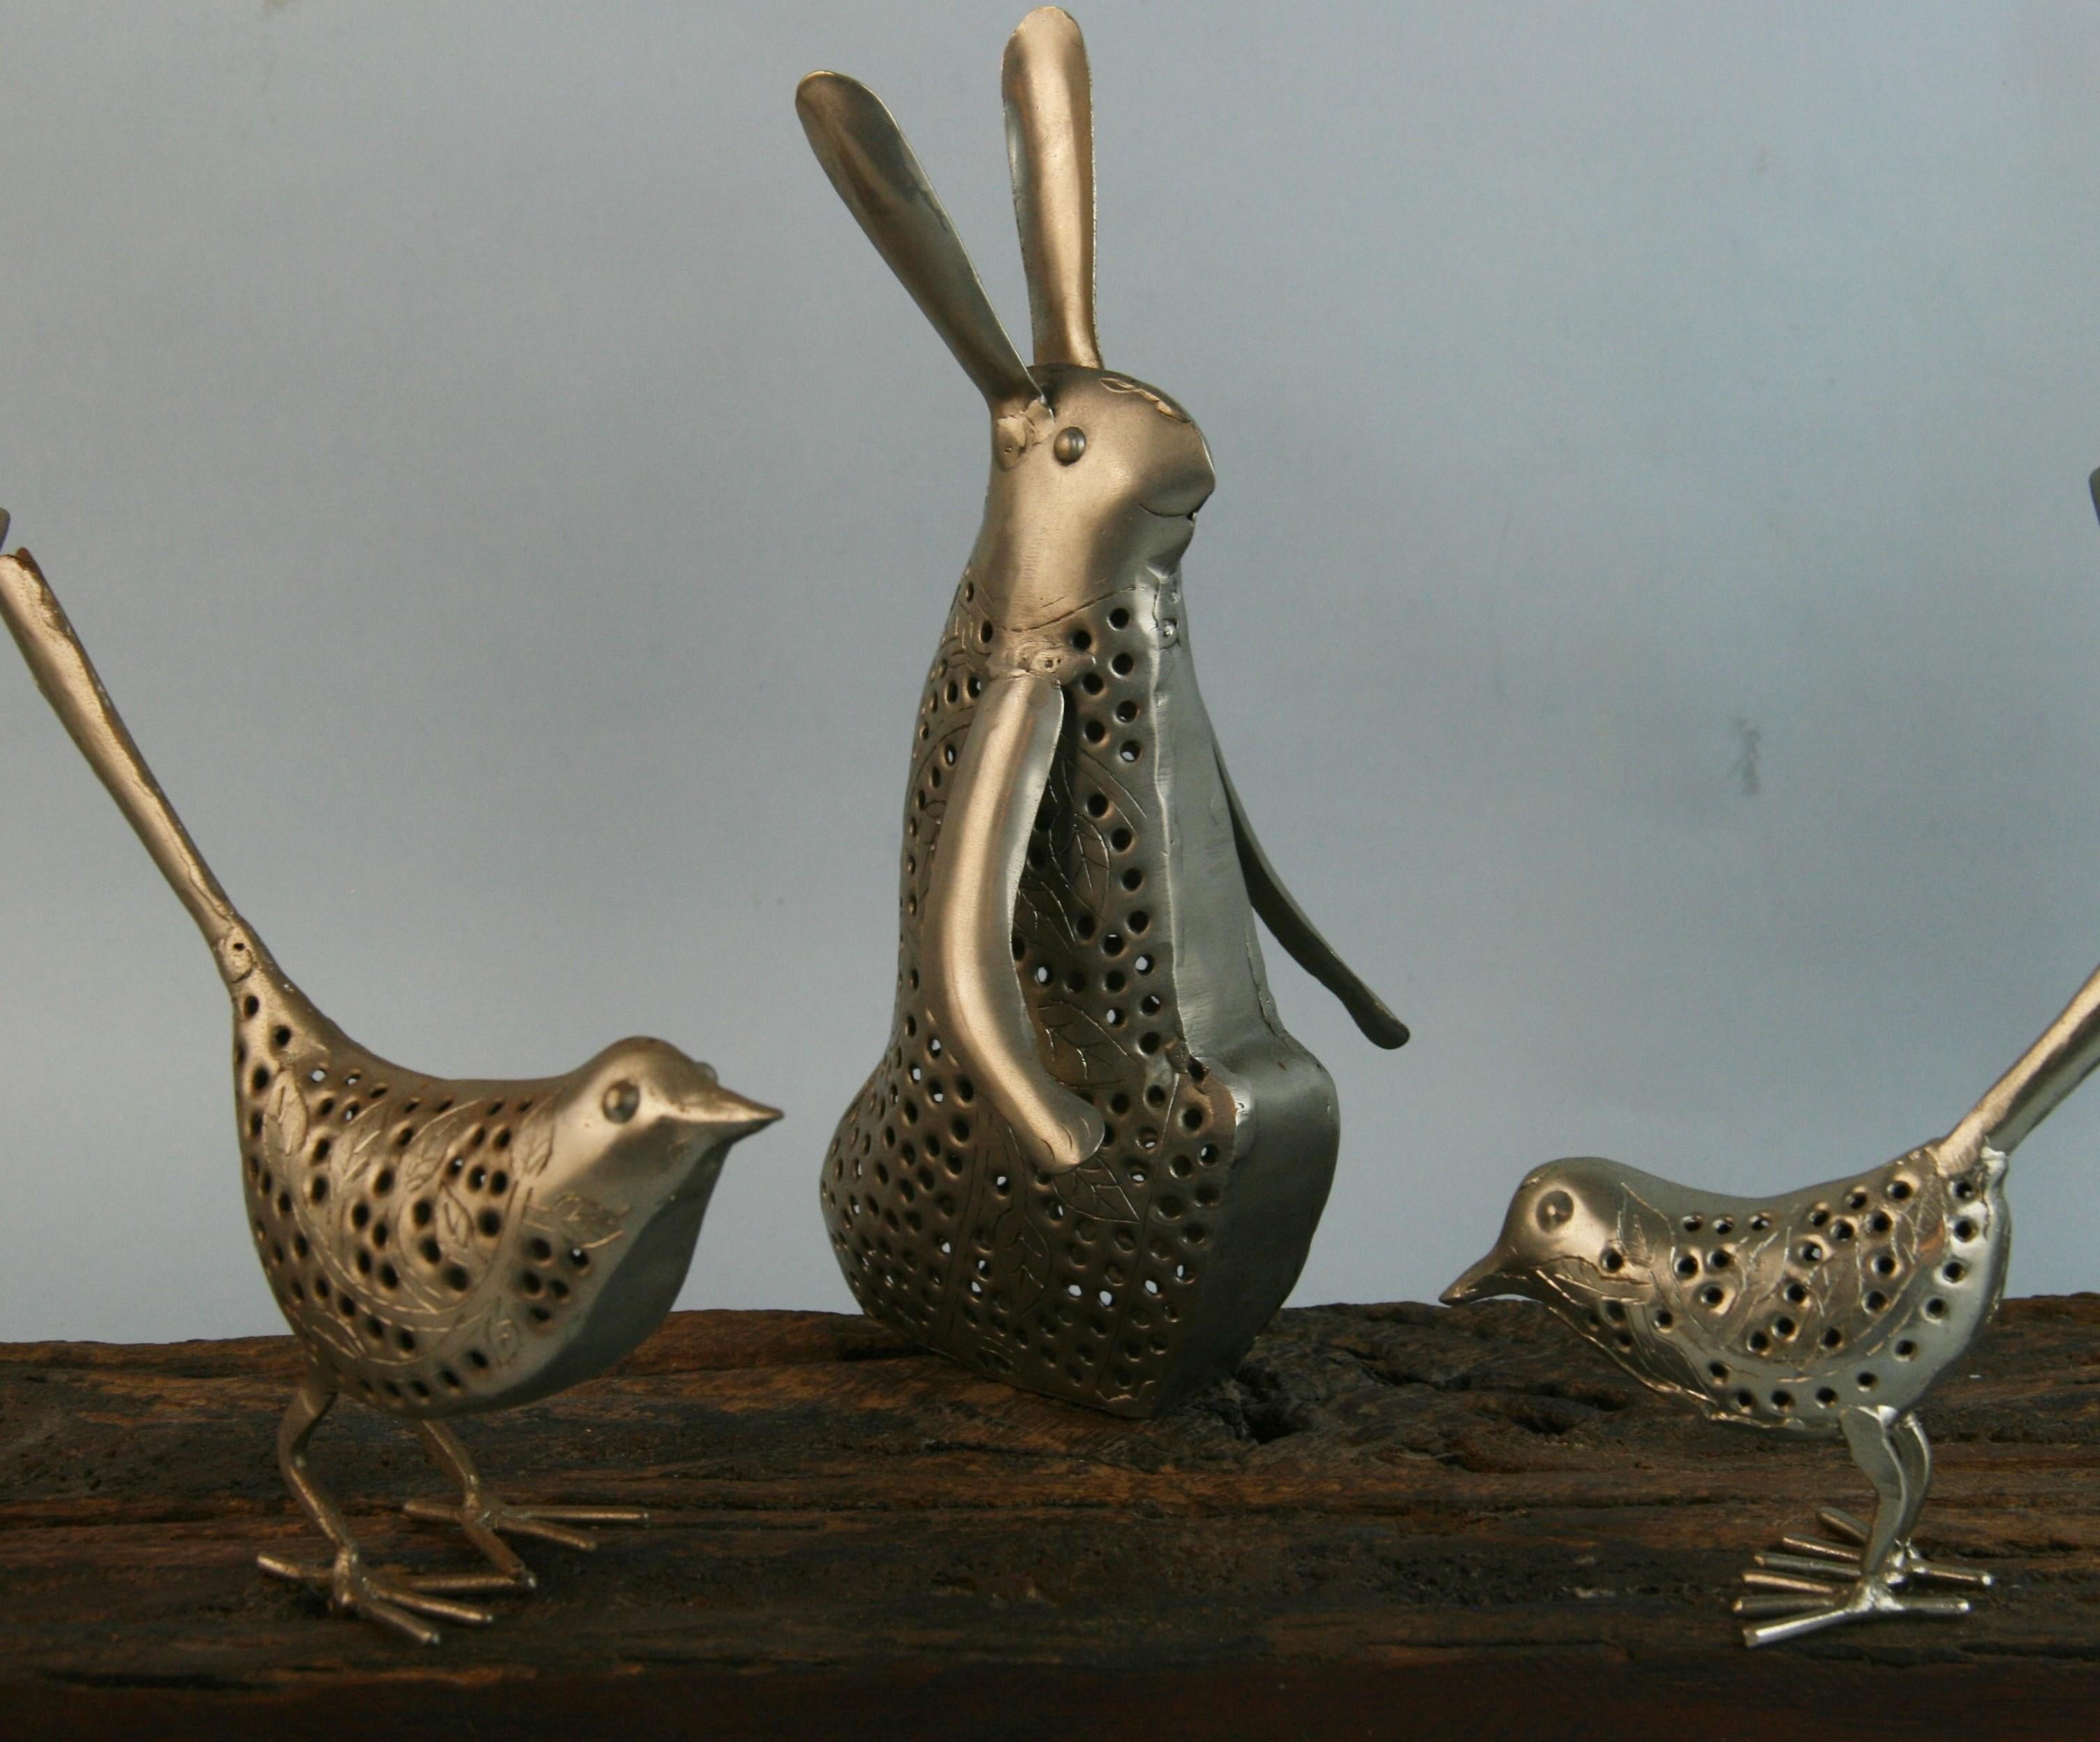 Scandinavian Folk Art Silvered Rabbit and Birds Candleholder/Centerpiece In Good Condition For Sale In Douglas Manor, NY